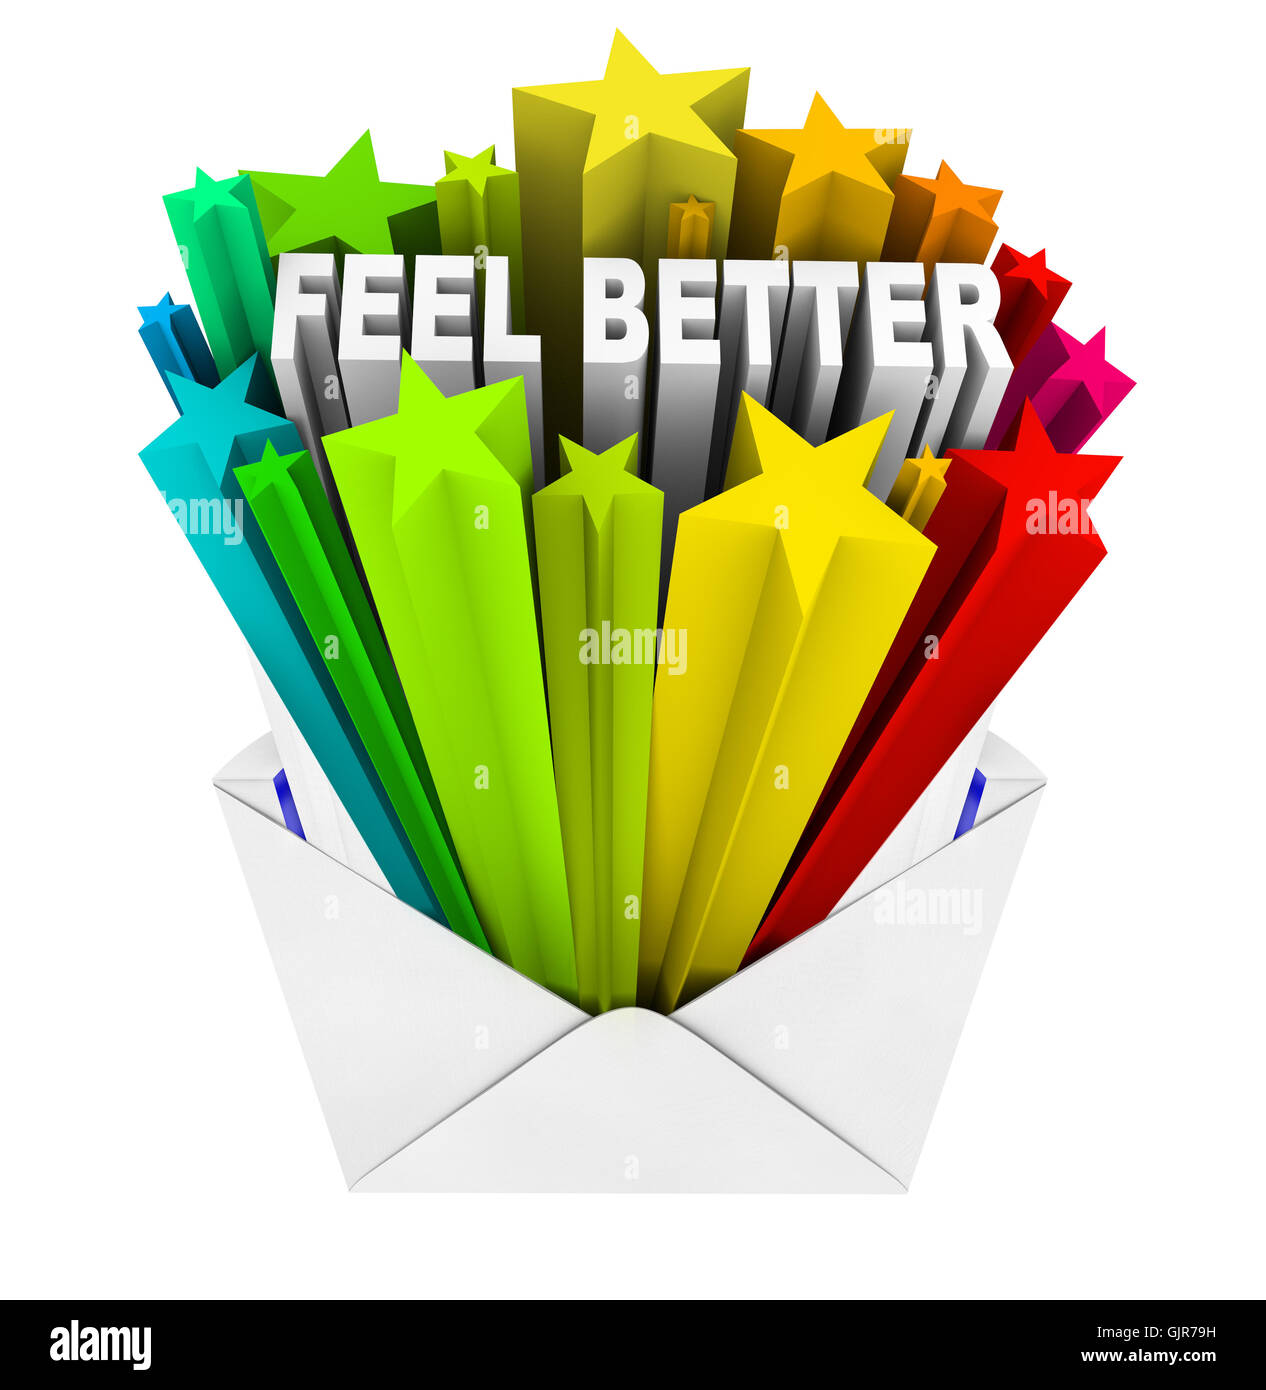 Feel Better Words in Evnelope - Get Well Card Stock Photo